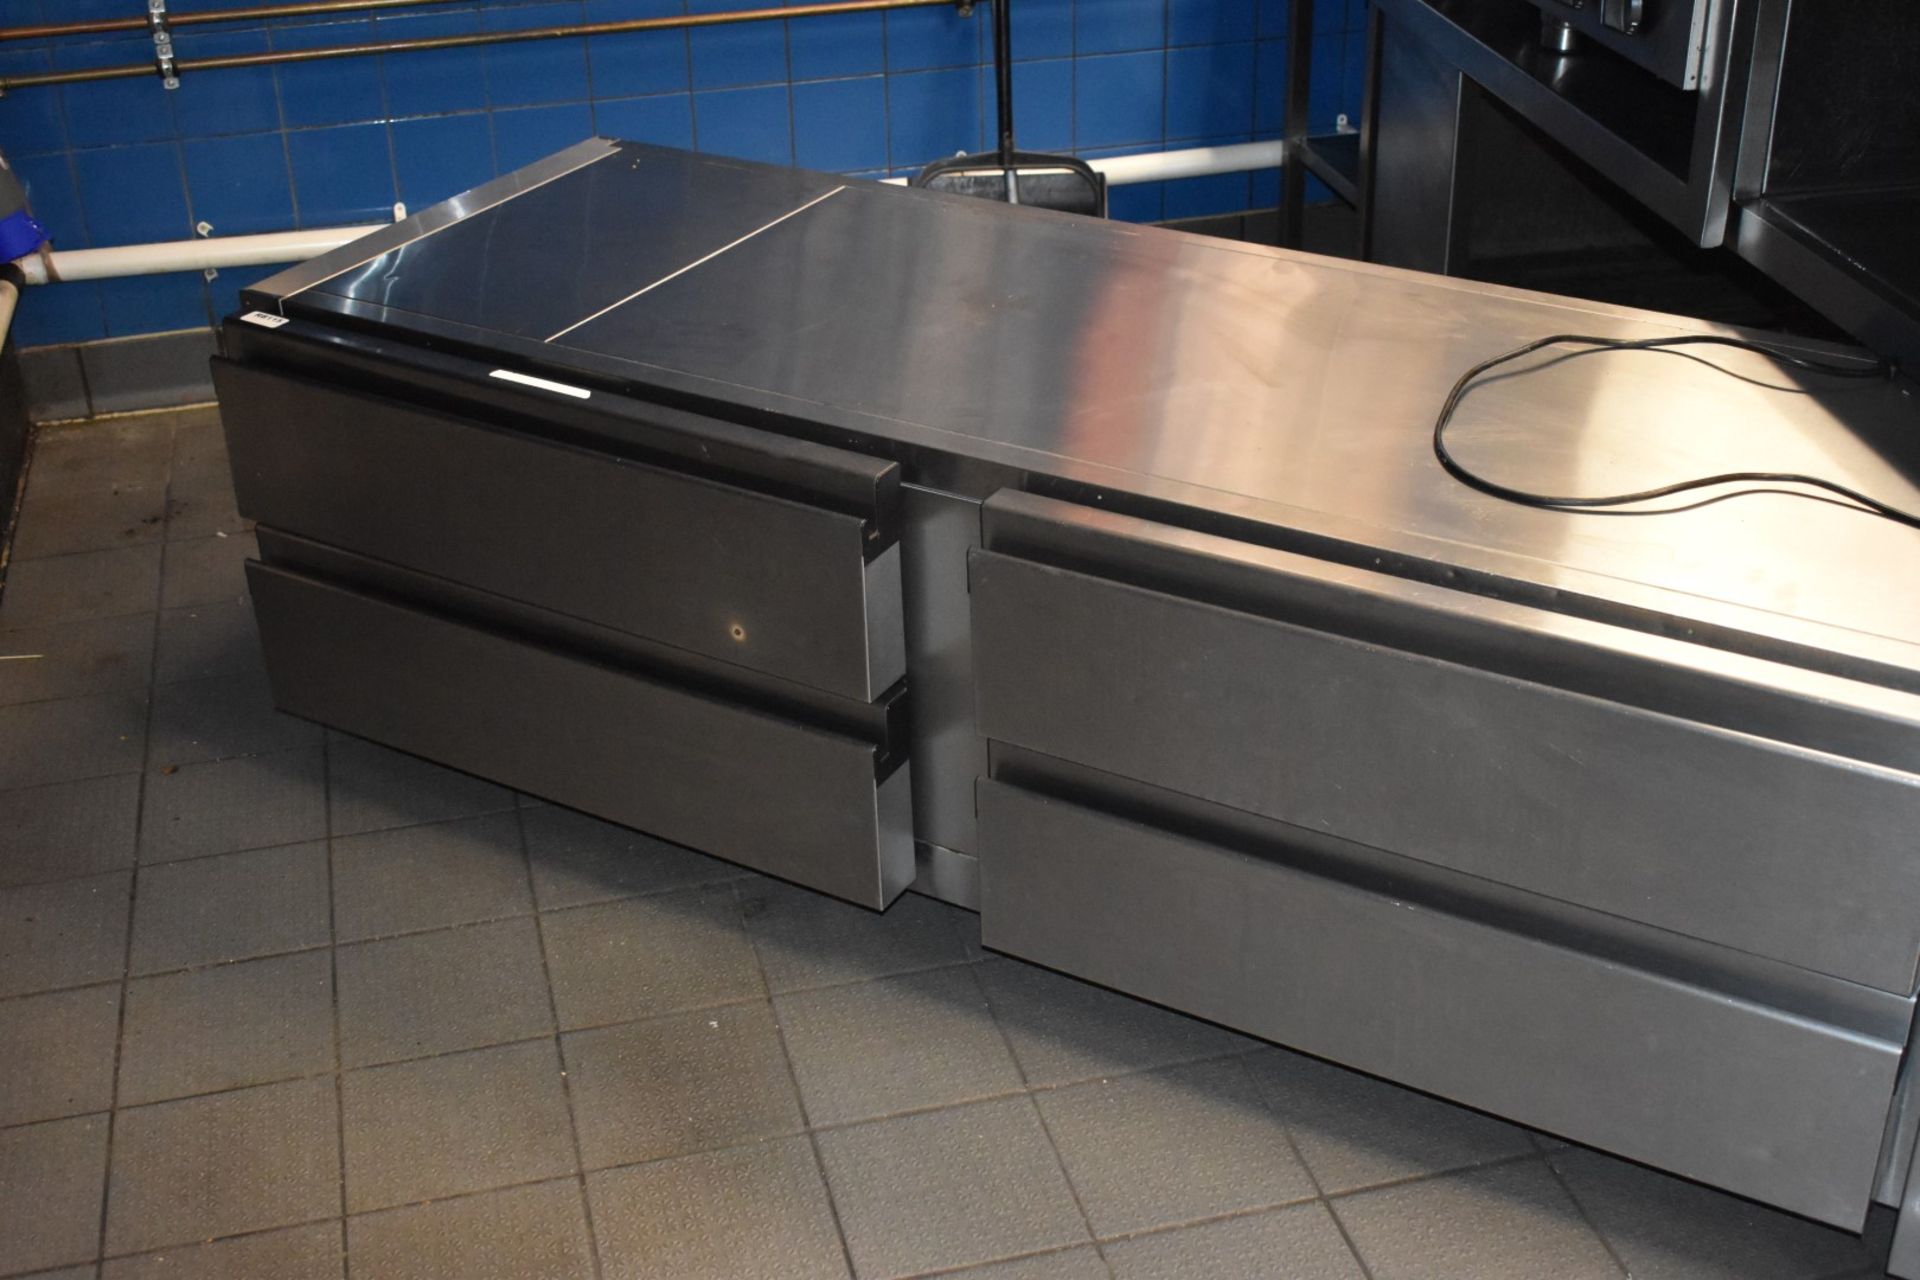 1 x Precision HUBC422 Under Broiler Refrigerated Counter - RRP £3,900 - Size H54 x W200 x D67 - Image 2 of 4